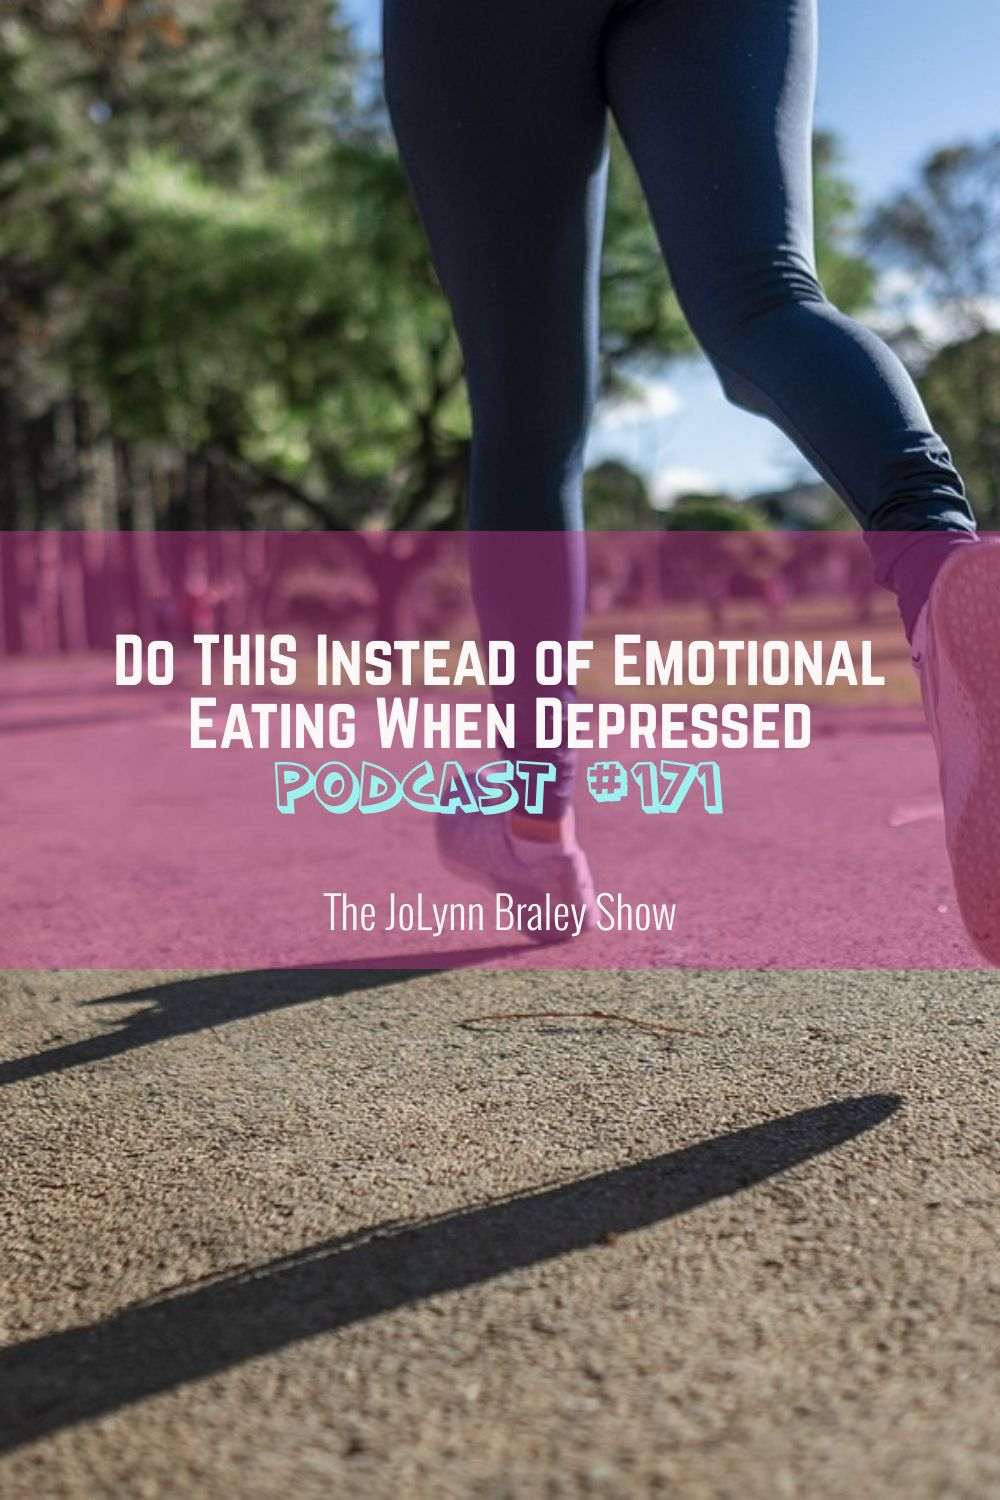 Do THIS Instead of Emotional Eating When Depressed [Podcast #171]